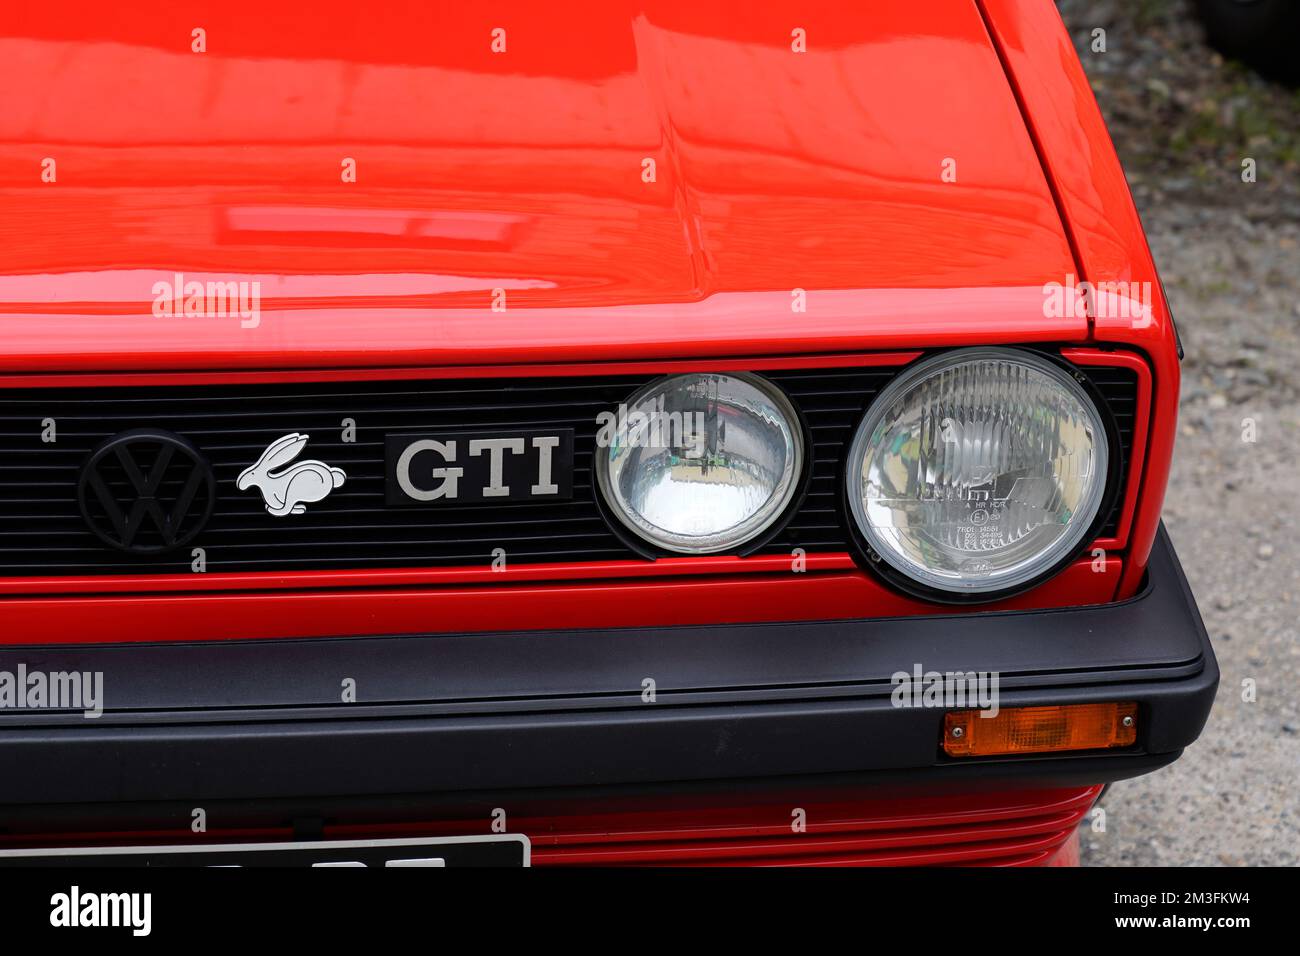 Bordeaux , Aquitaine  France - 11 12 2022 : Volkswagen Golf 1 car rabbit gti logo brand and text sign seventies red young timer german car Stock Photo